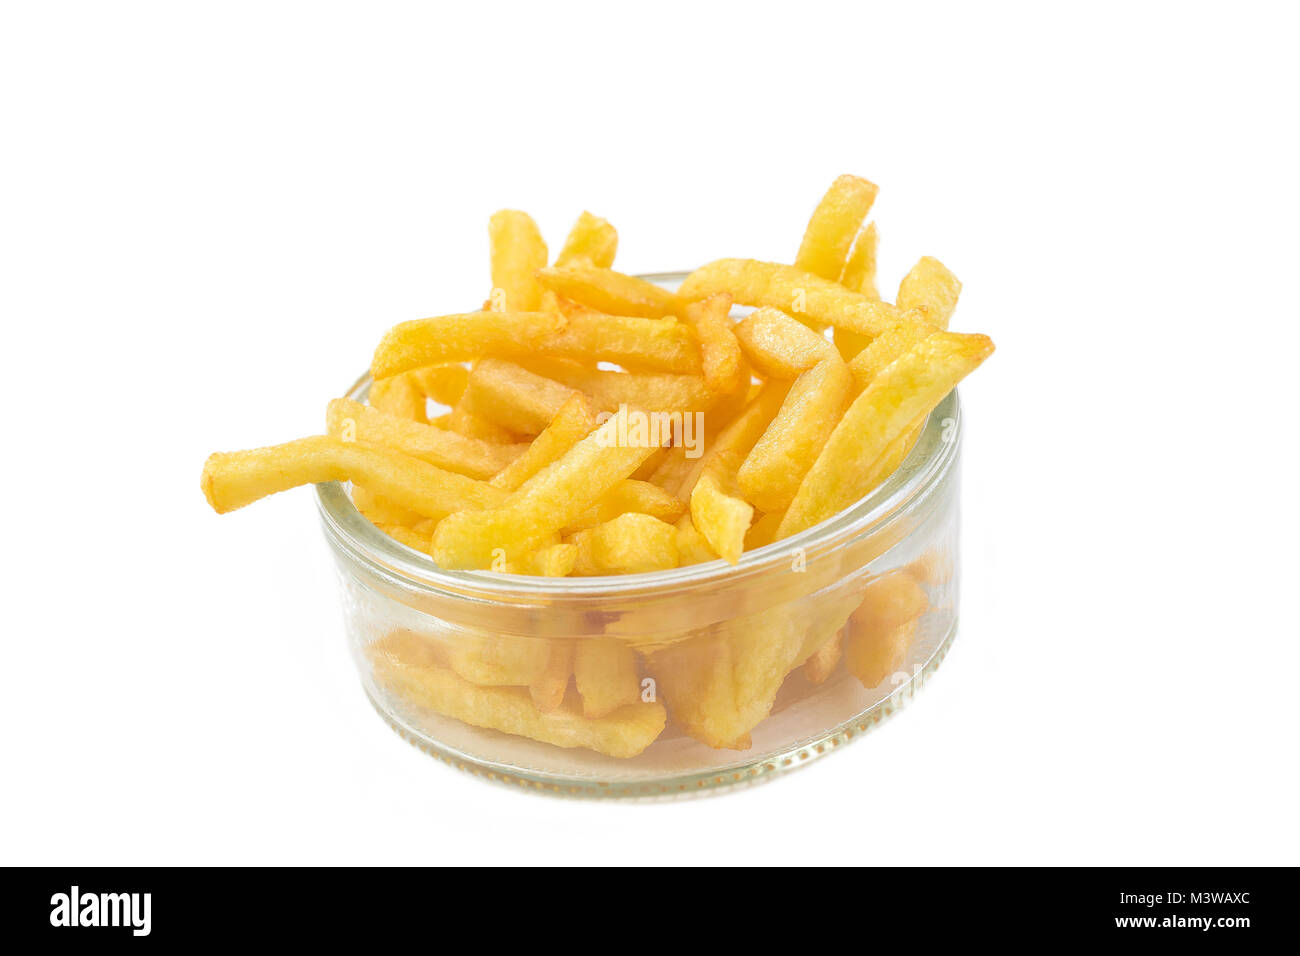 bowl of french fries on white background Stock Photo